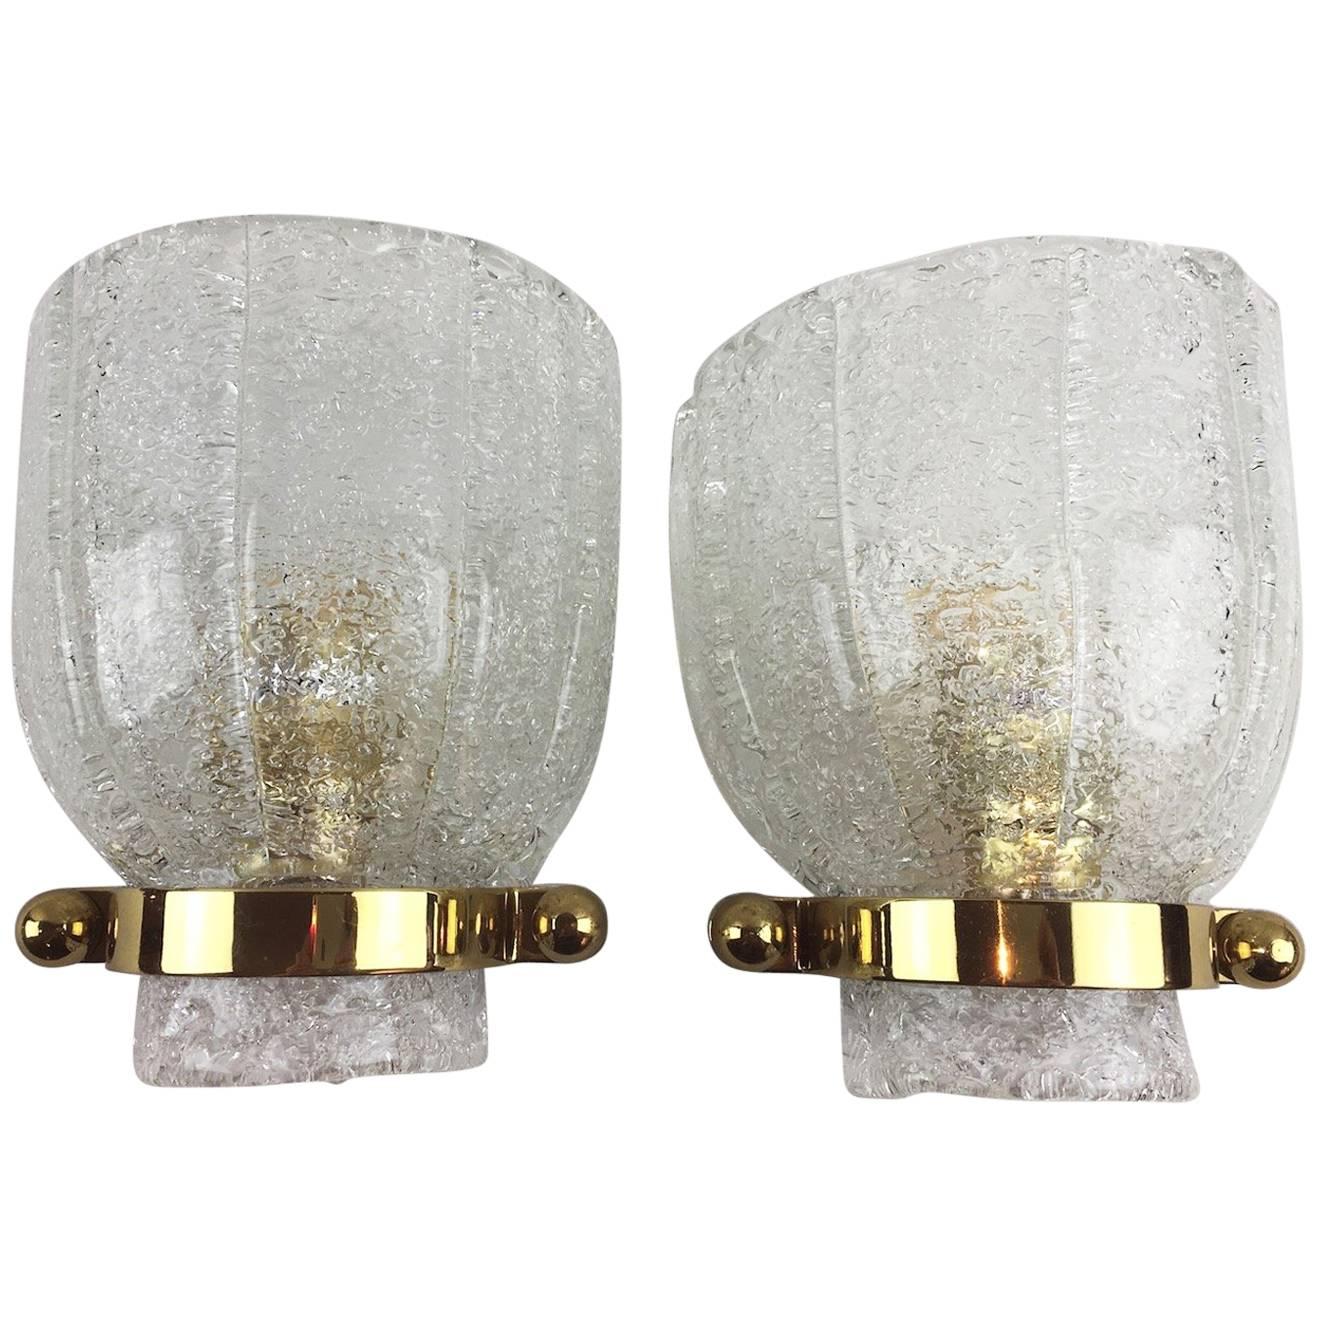 Pair of Calyx Pattern Modernist Hillebrand Glass Sconces - SPECIAL PRICE For Sale